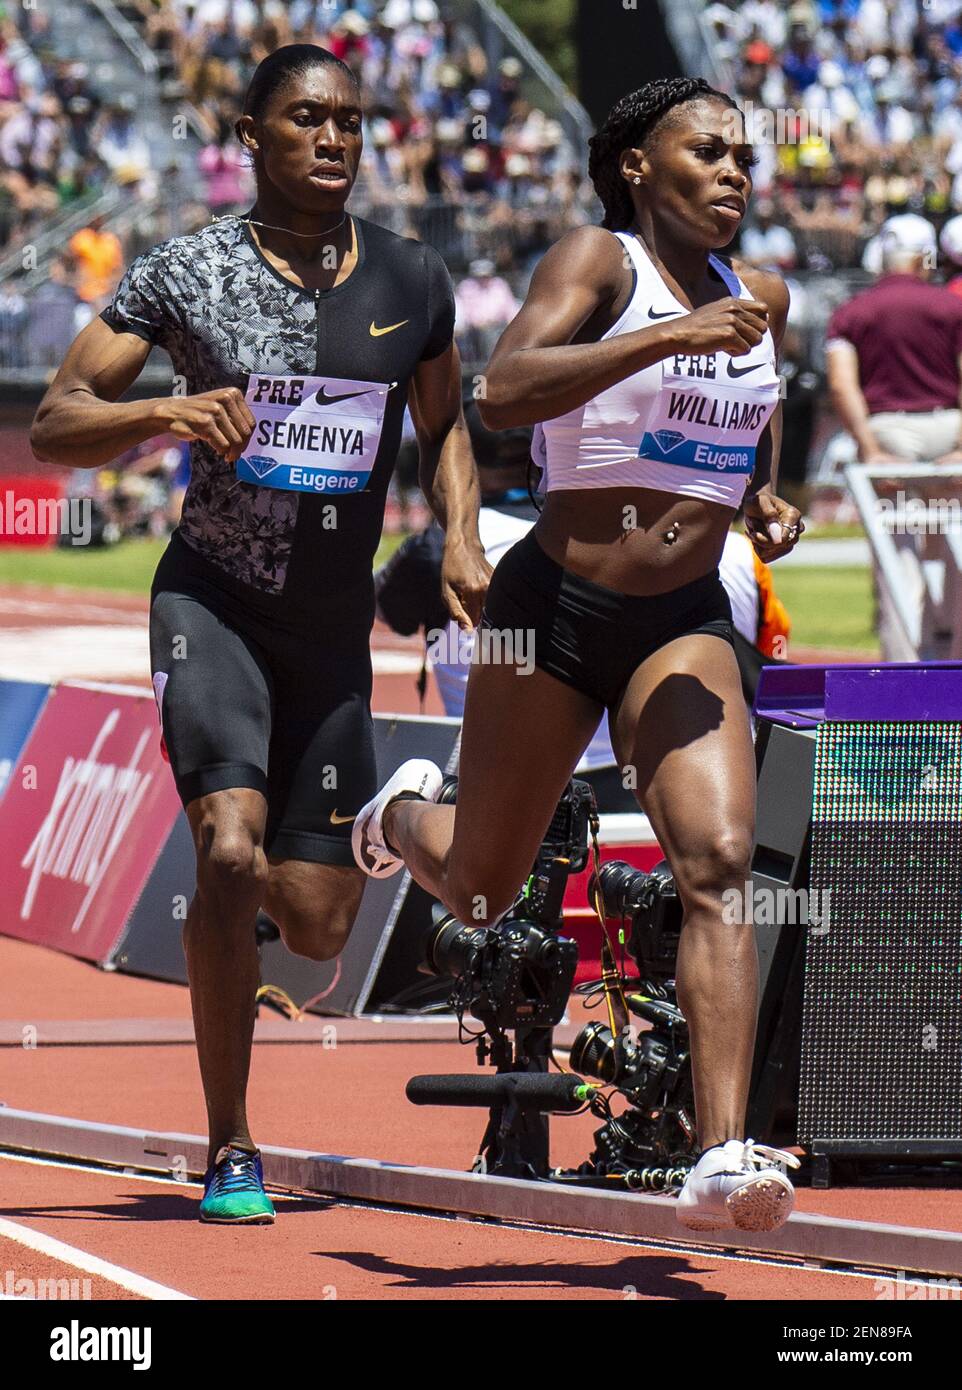 Jun 30, 2019 Stanford, CA : Chrishuna Williams and Caster Semenya lead the  pack in the women's 800 Meters during the Nike Prefontaine Classic at  Stanford University Palo Alto, CA. Thurman James / (